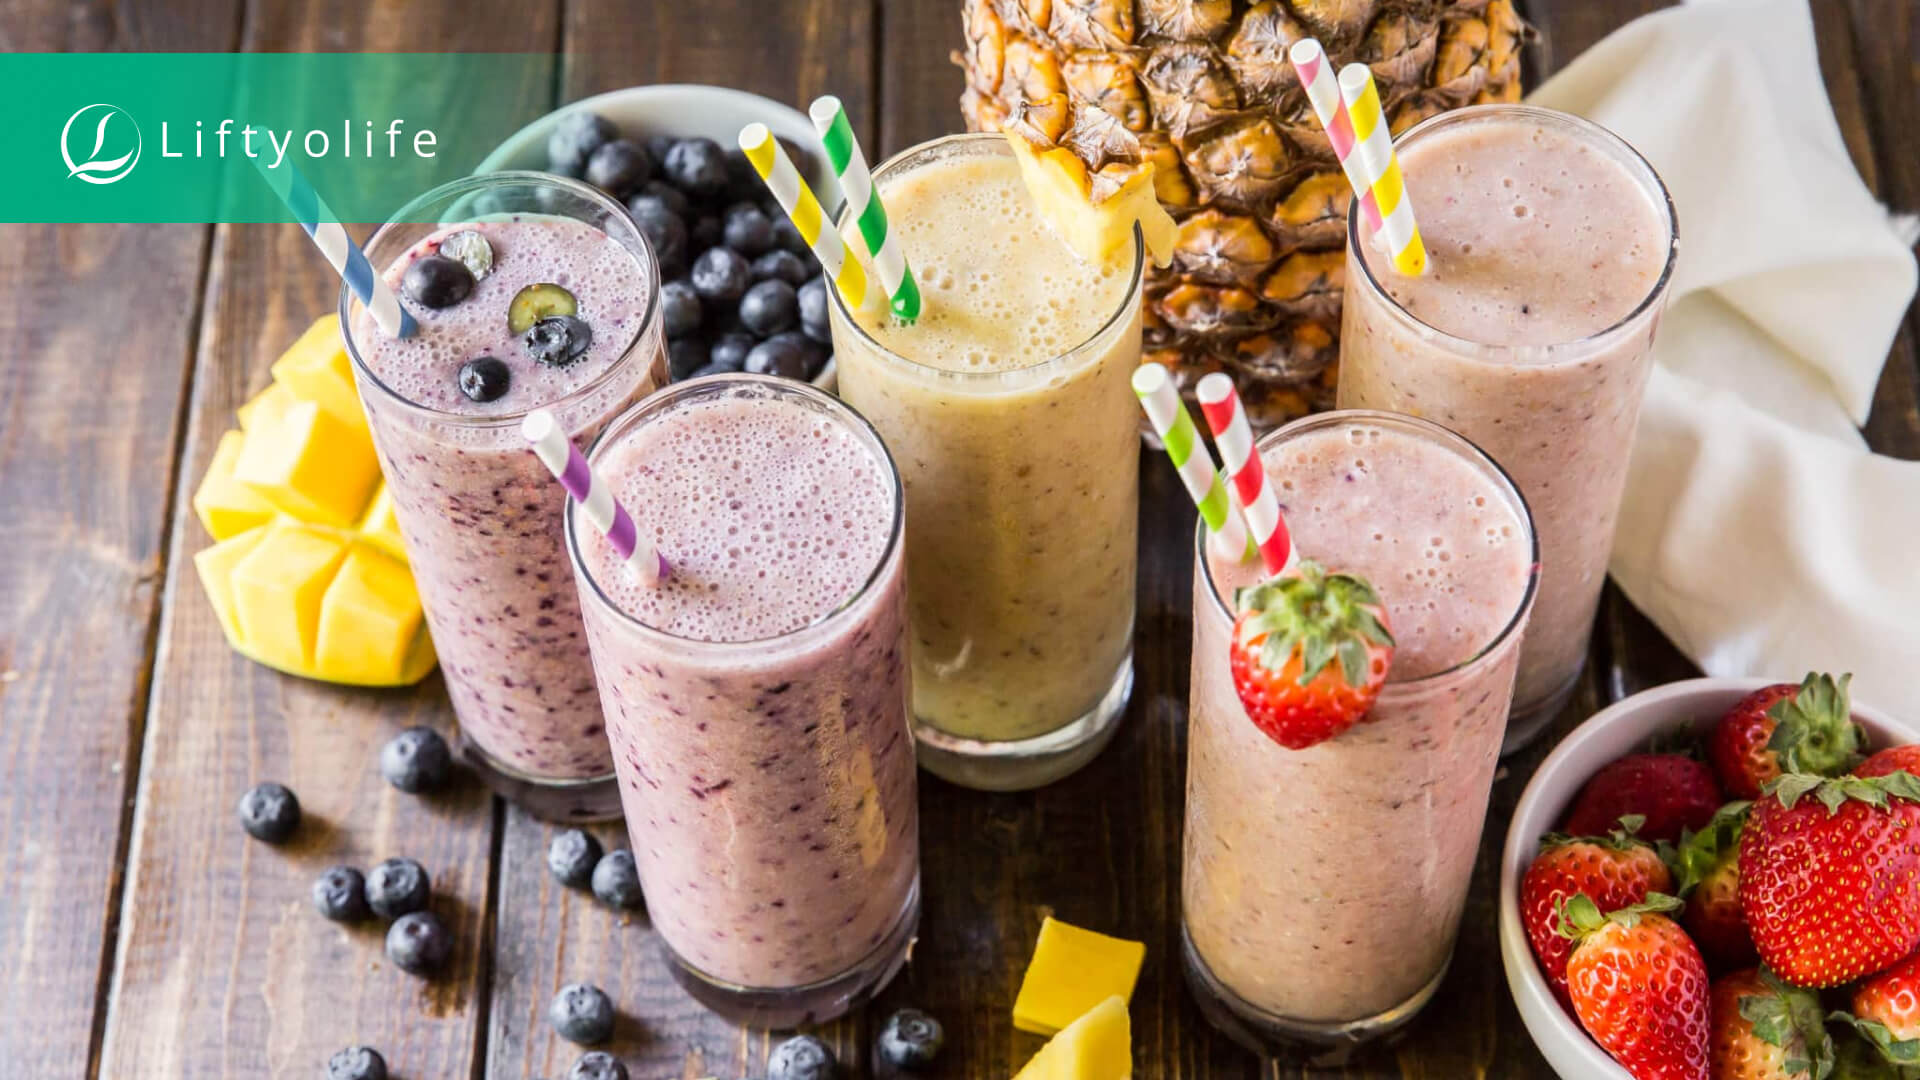 Start the day with a smoothie